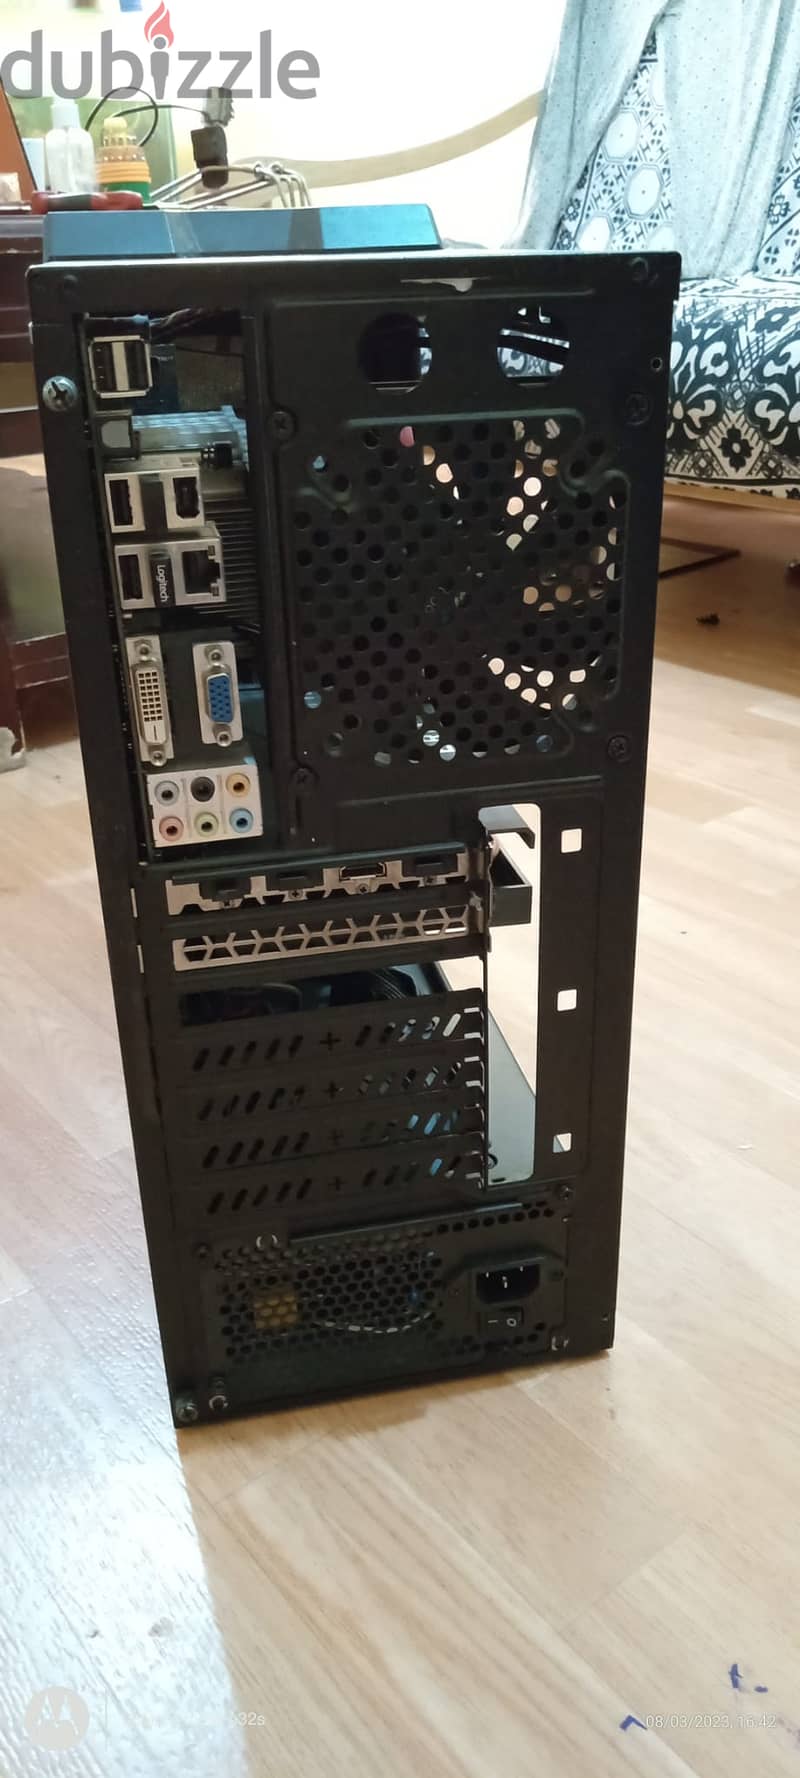 DESKTOP COMPUTER FOR SALE WITH Core i5 6th generation, Cooler Master 3